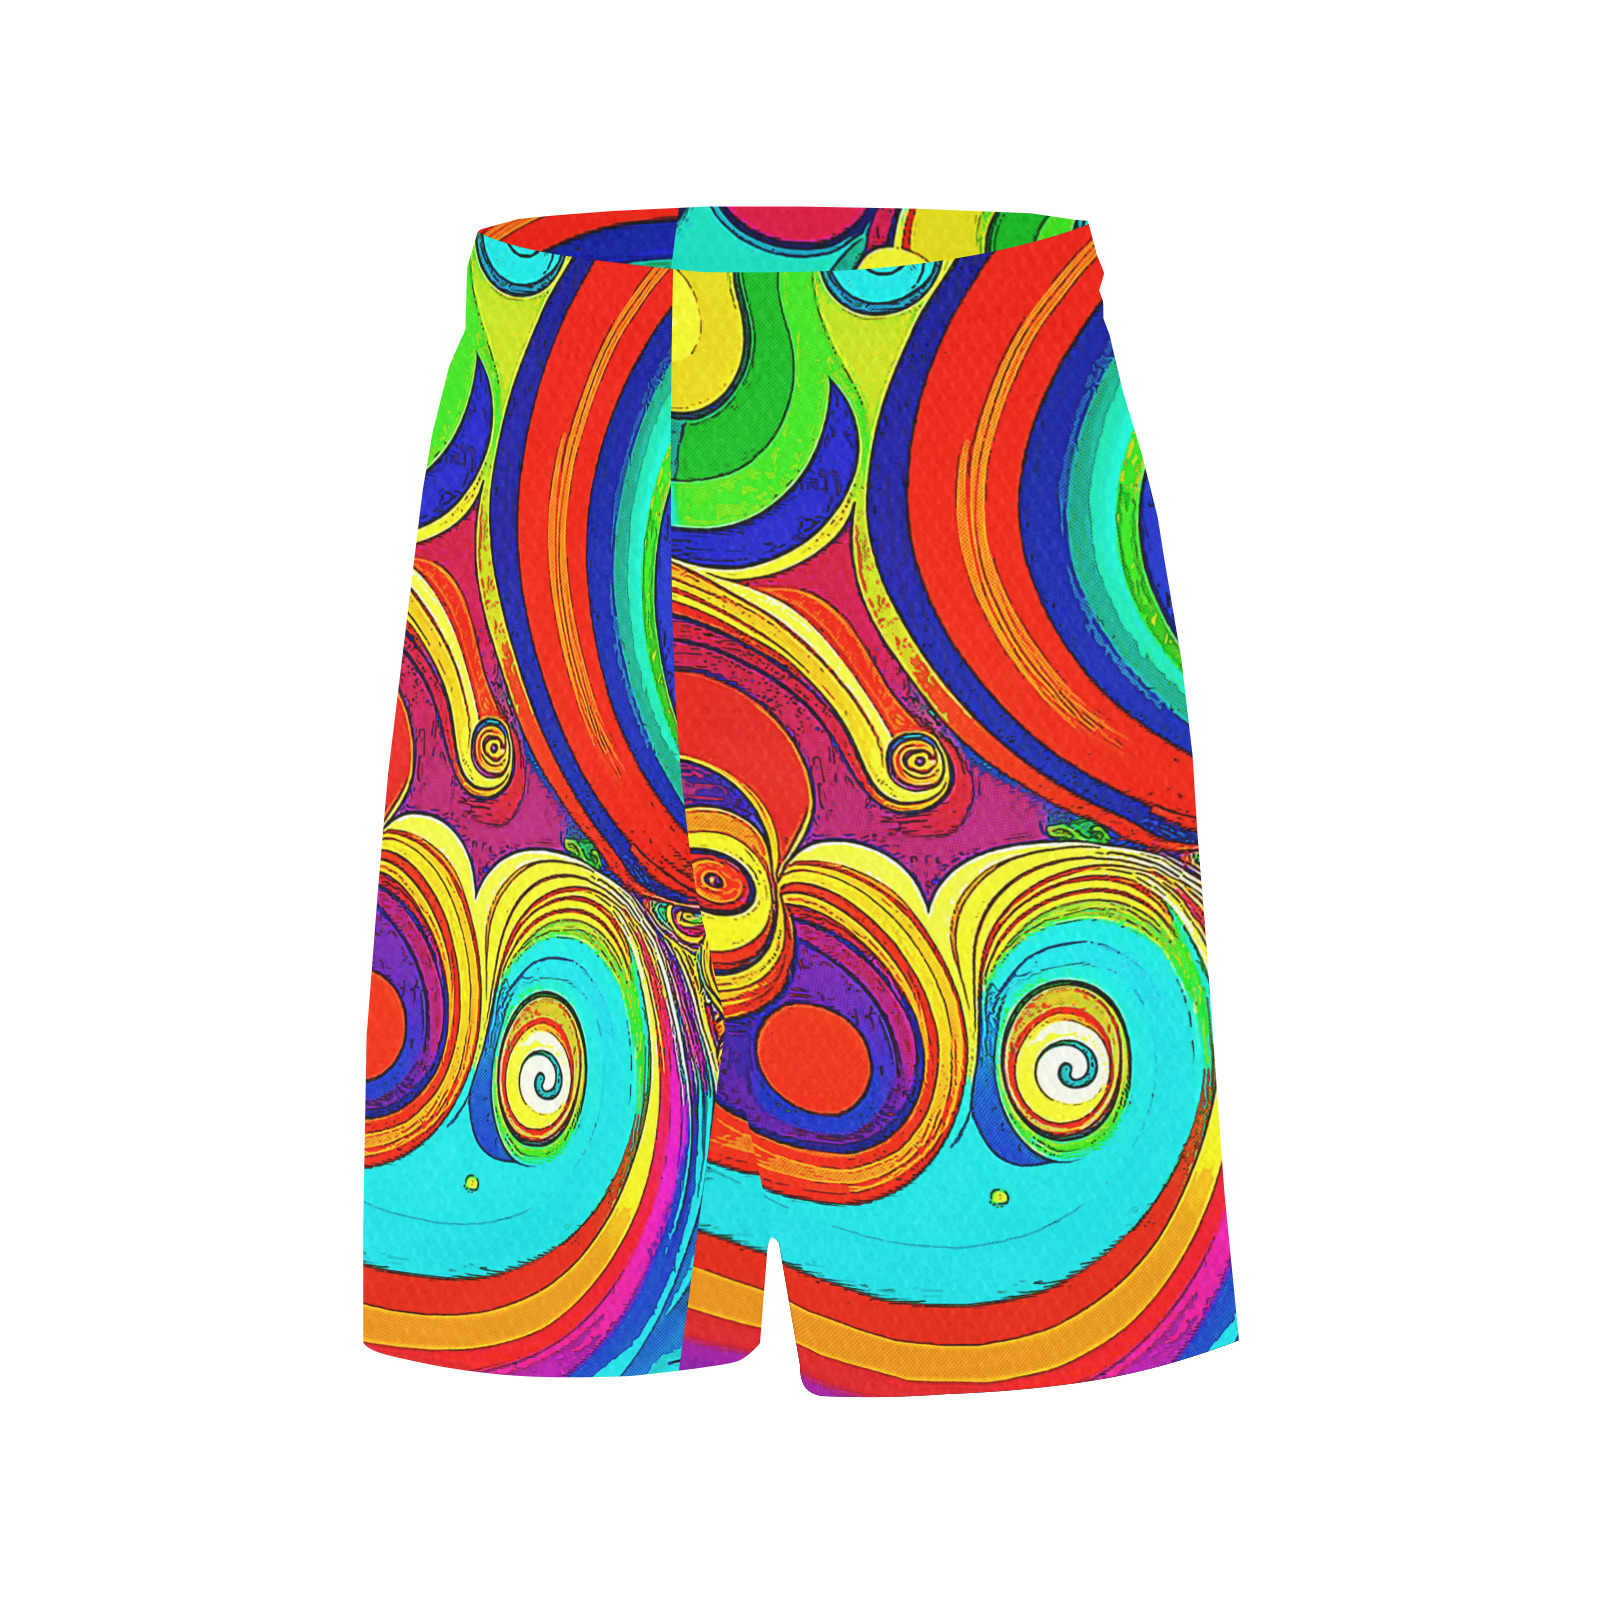 Colorful Groovy Rainbow Swirls All Over Print Basketball Shorts